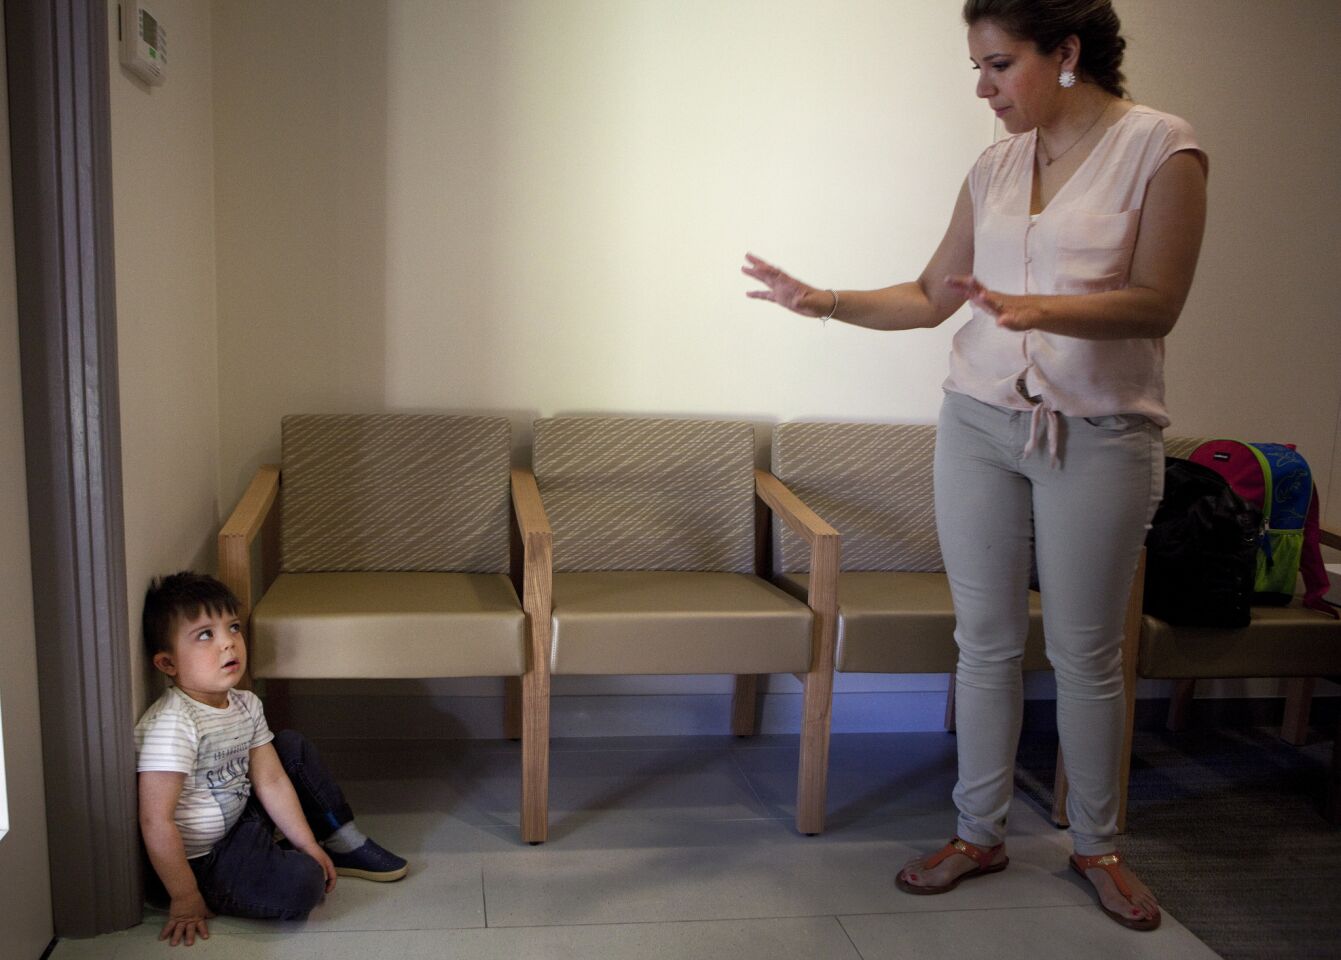 Auguste gets a timeout from his mother at USC Center for Childhood Communication while waiting for auditory tests.